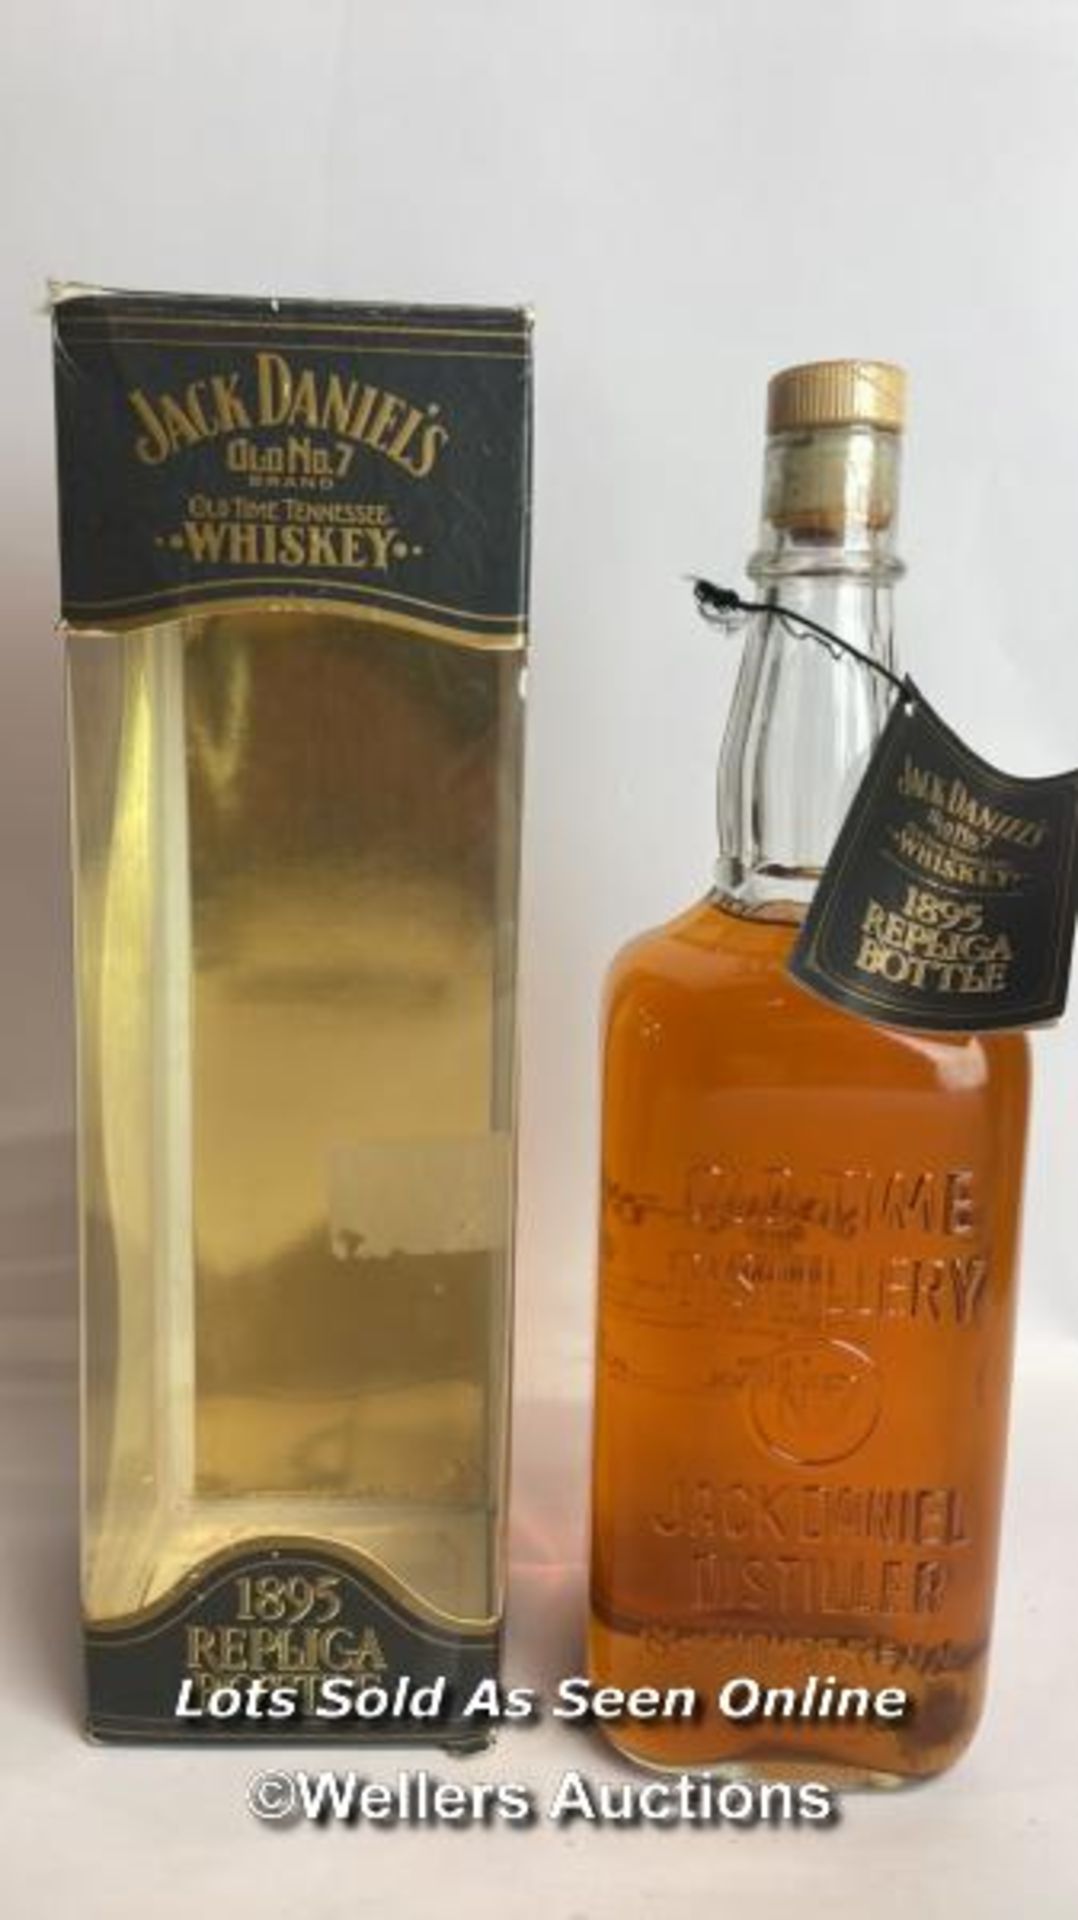 1895 Jack Daniels Replica Bottle, Old No.7 Brand, Old Time Tennessee Whiskey, 1L, 43% vol / Please